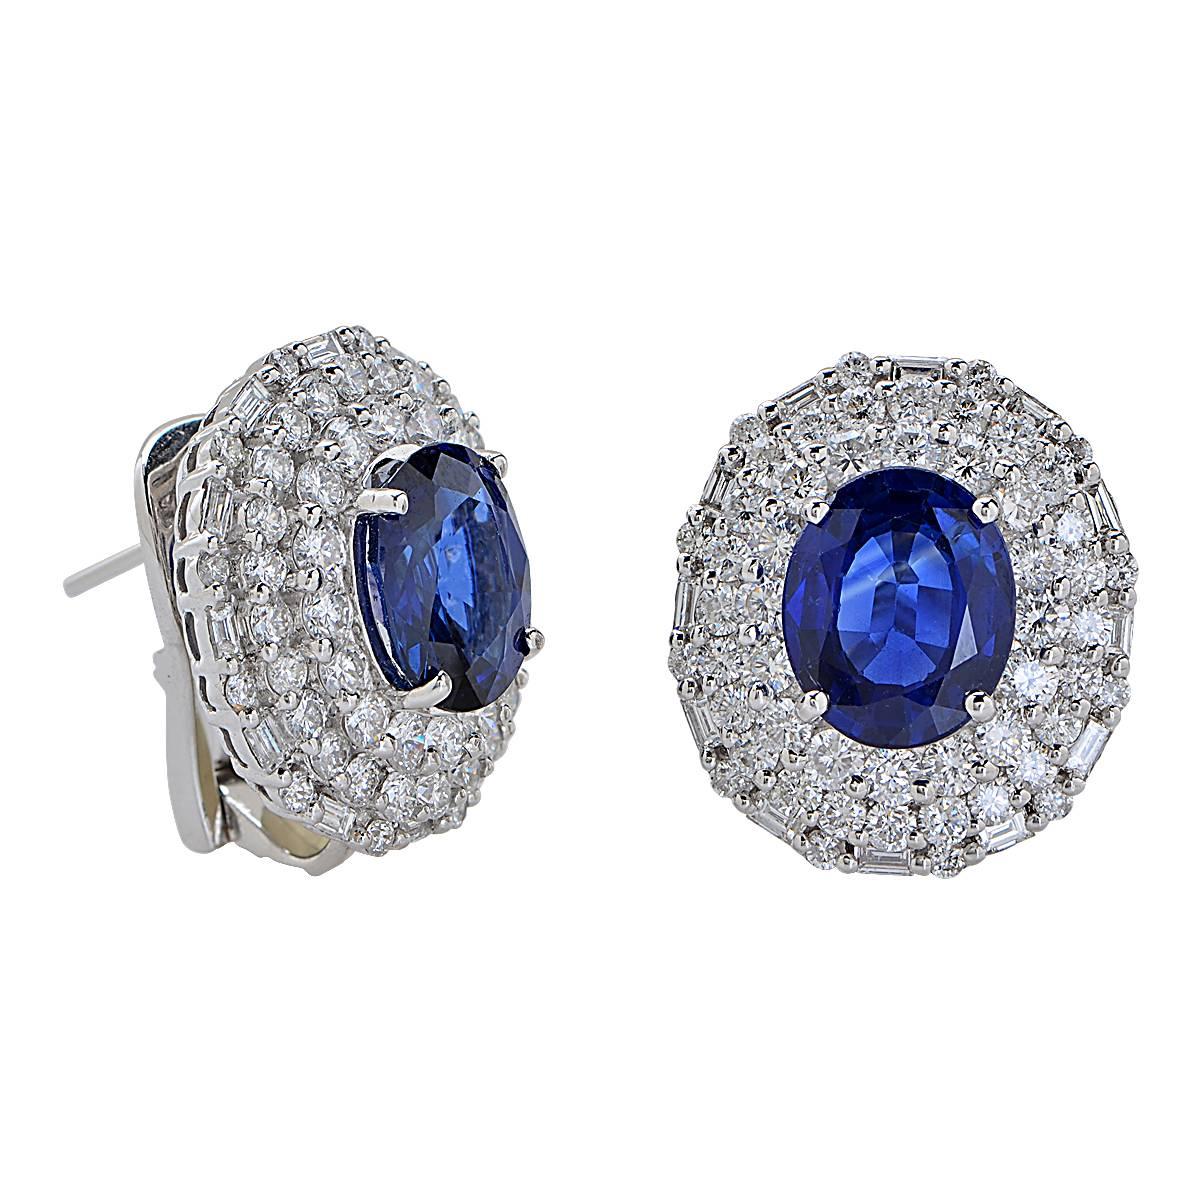 18 Karat White Gold Earrings Containing 2 Beautiful Deep Blue Oval Sapphires Weighing 6.33 Carats Surrounded by 128 Round Brilliant and Baguette Shape Diamonds Weighing 3.21 Carats, F Color, VS Clarity. These Earrings are